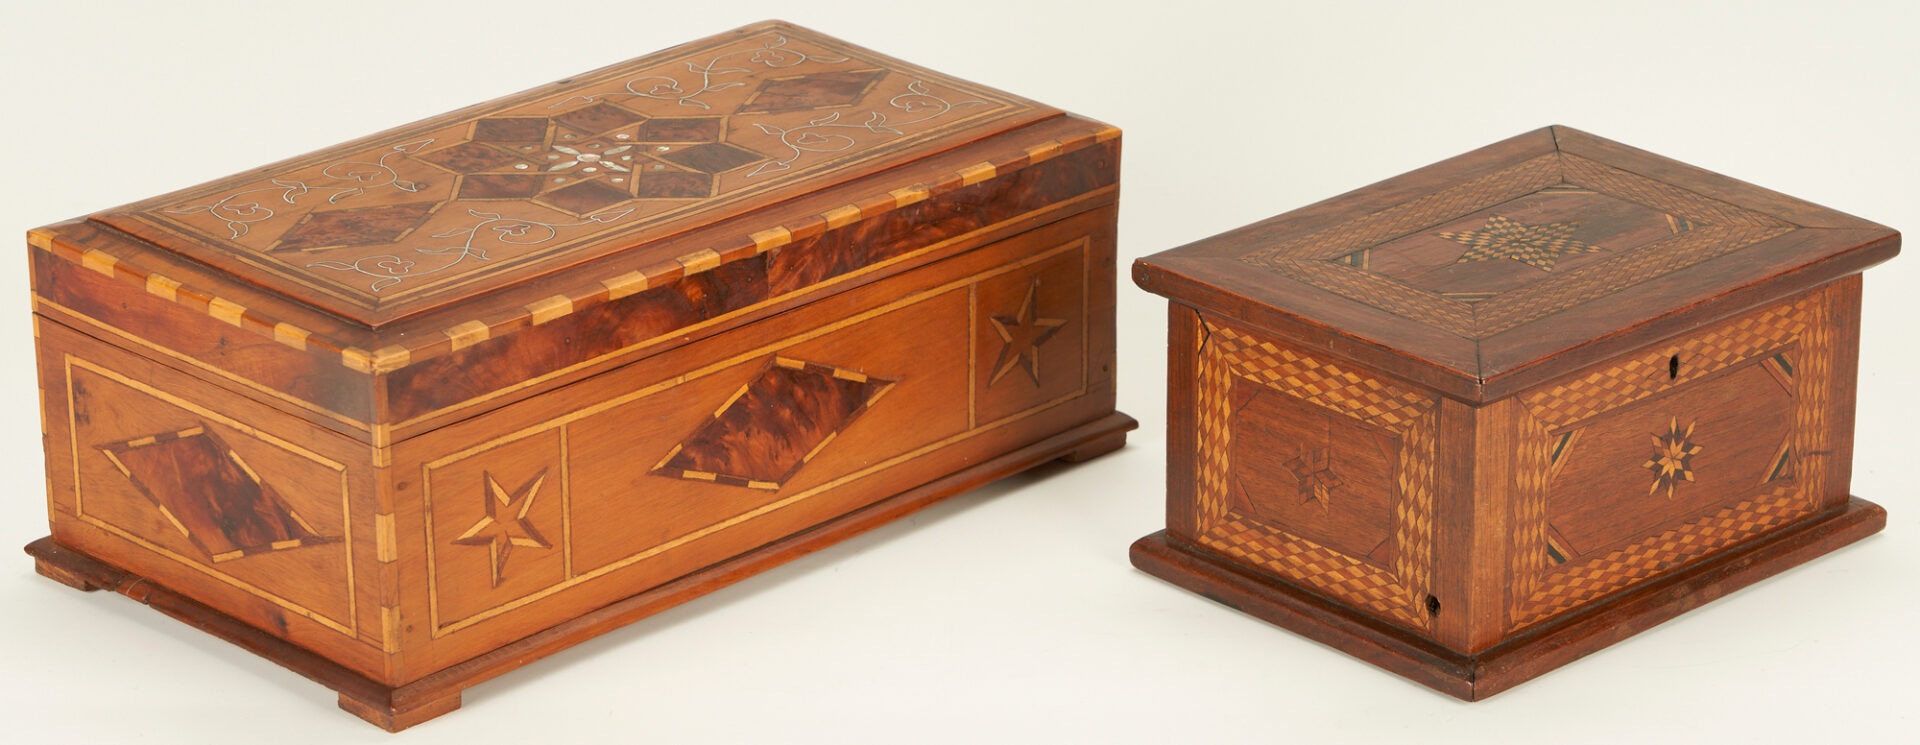 Lot 889: 2 Inlaid Folk Art Boxes, incl. Sailor Made Ditty w/ Mother of Pearl